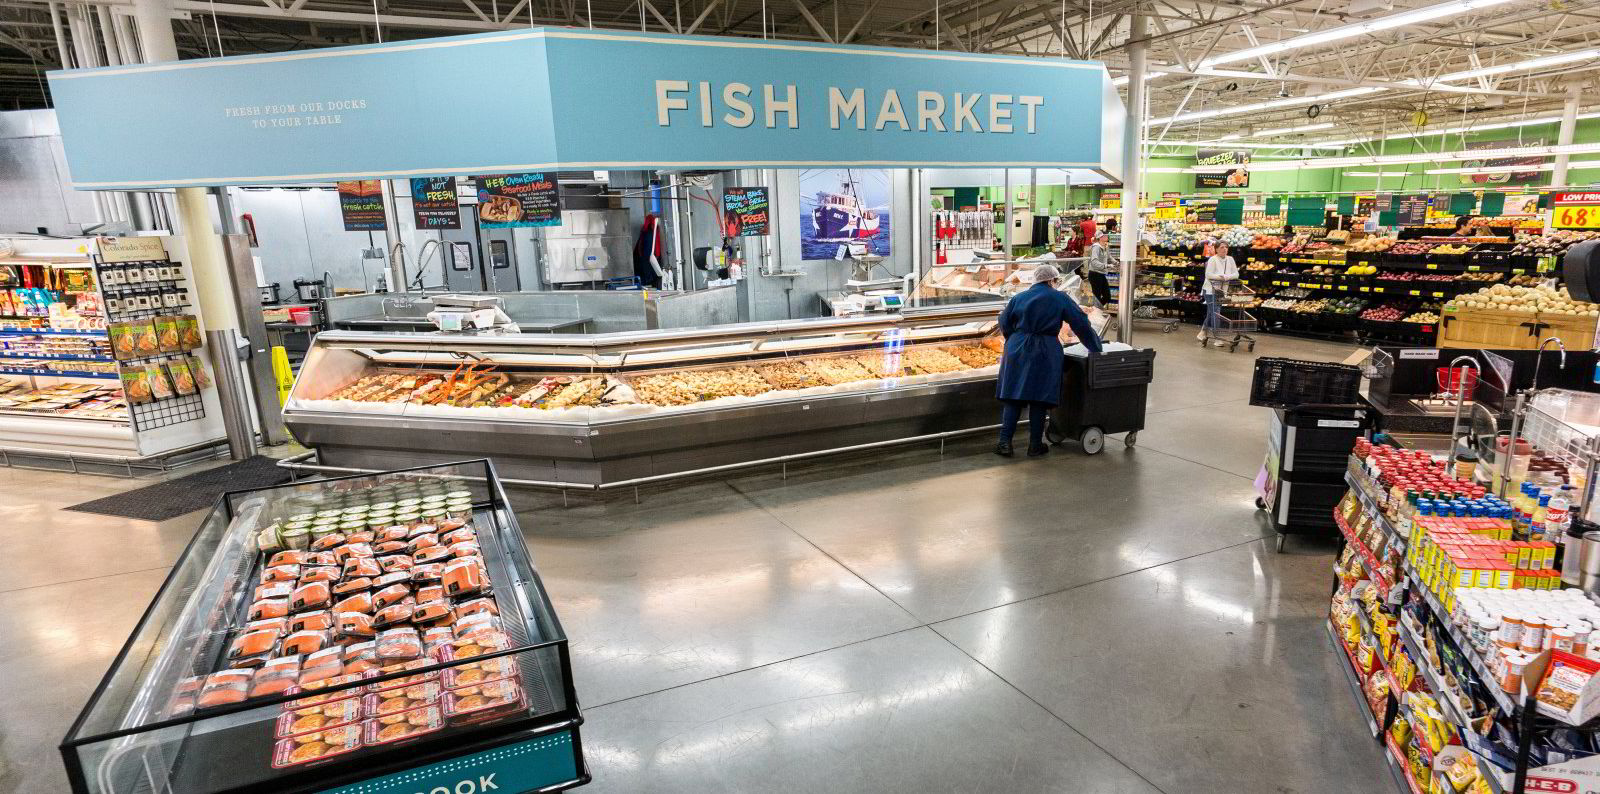 The kind of consumer I don't want to lose': Analyst warns retailers to  think carefully before removing fresh seafood counters